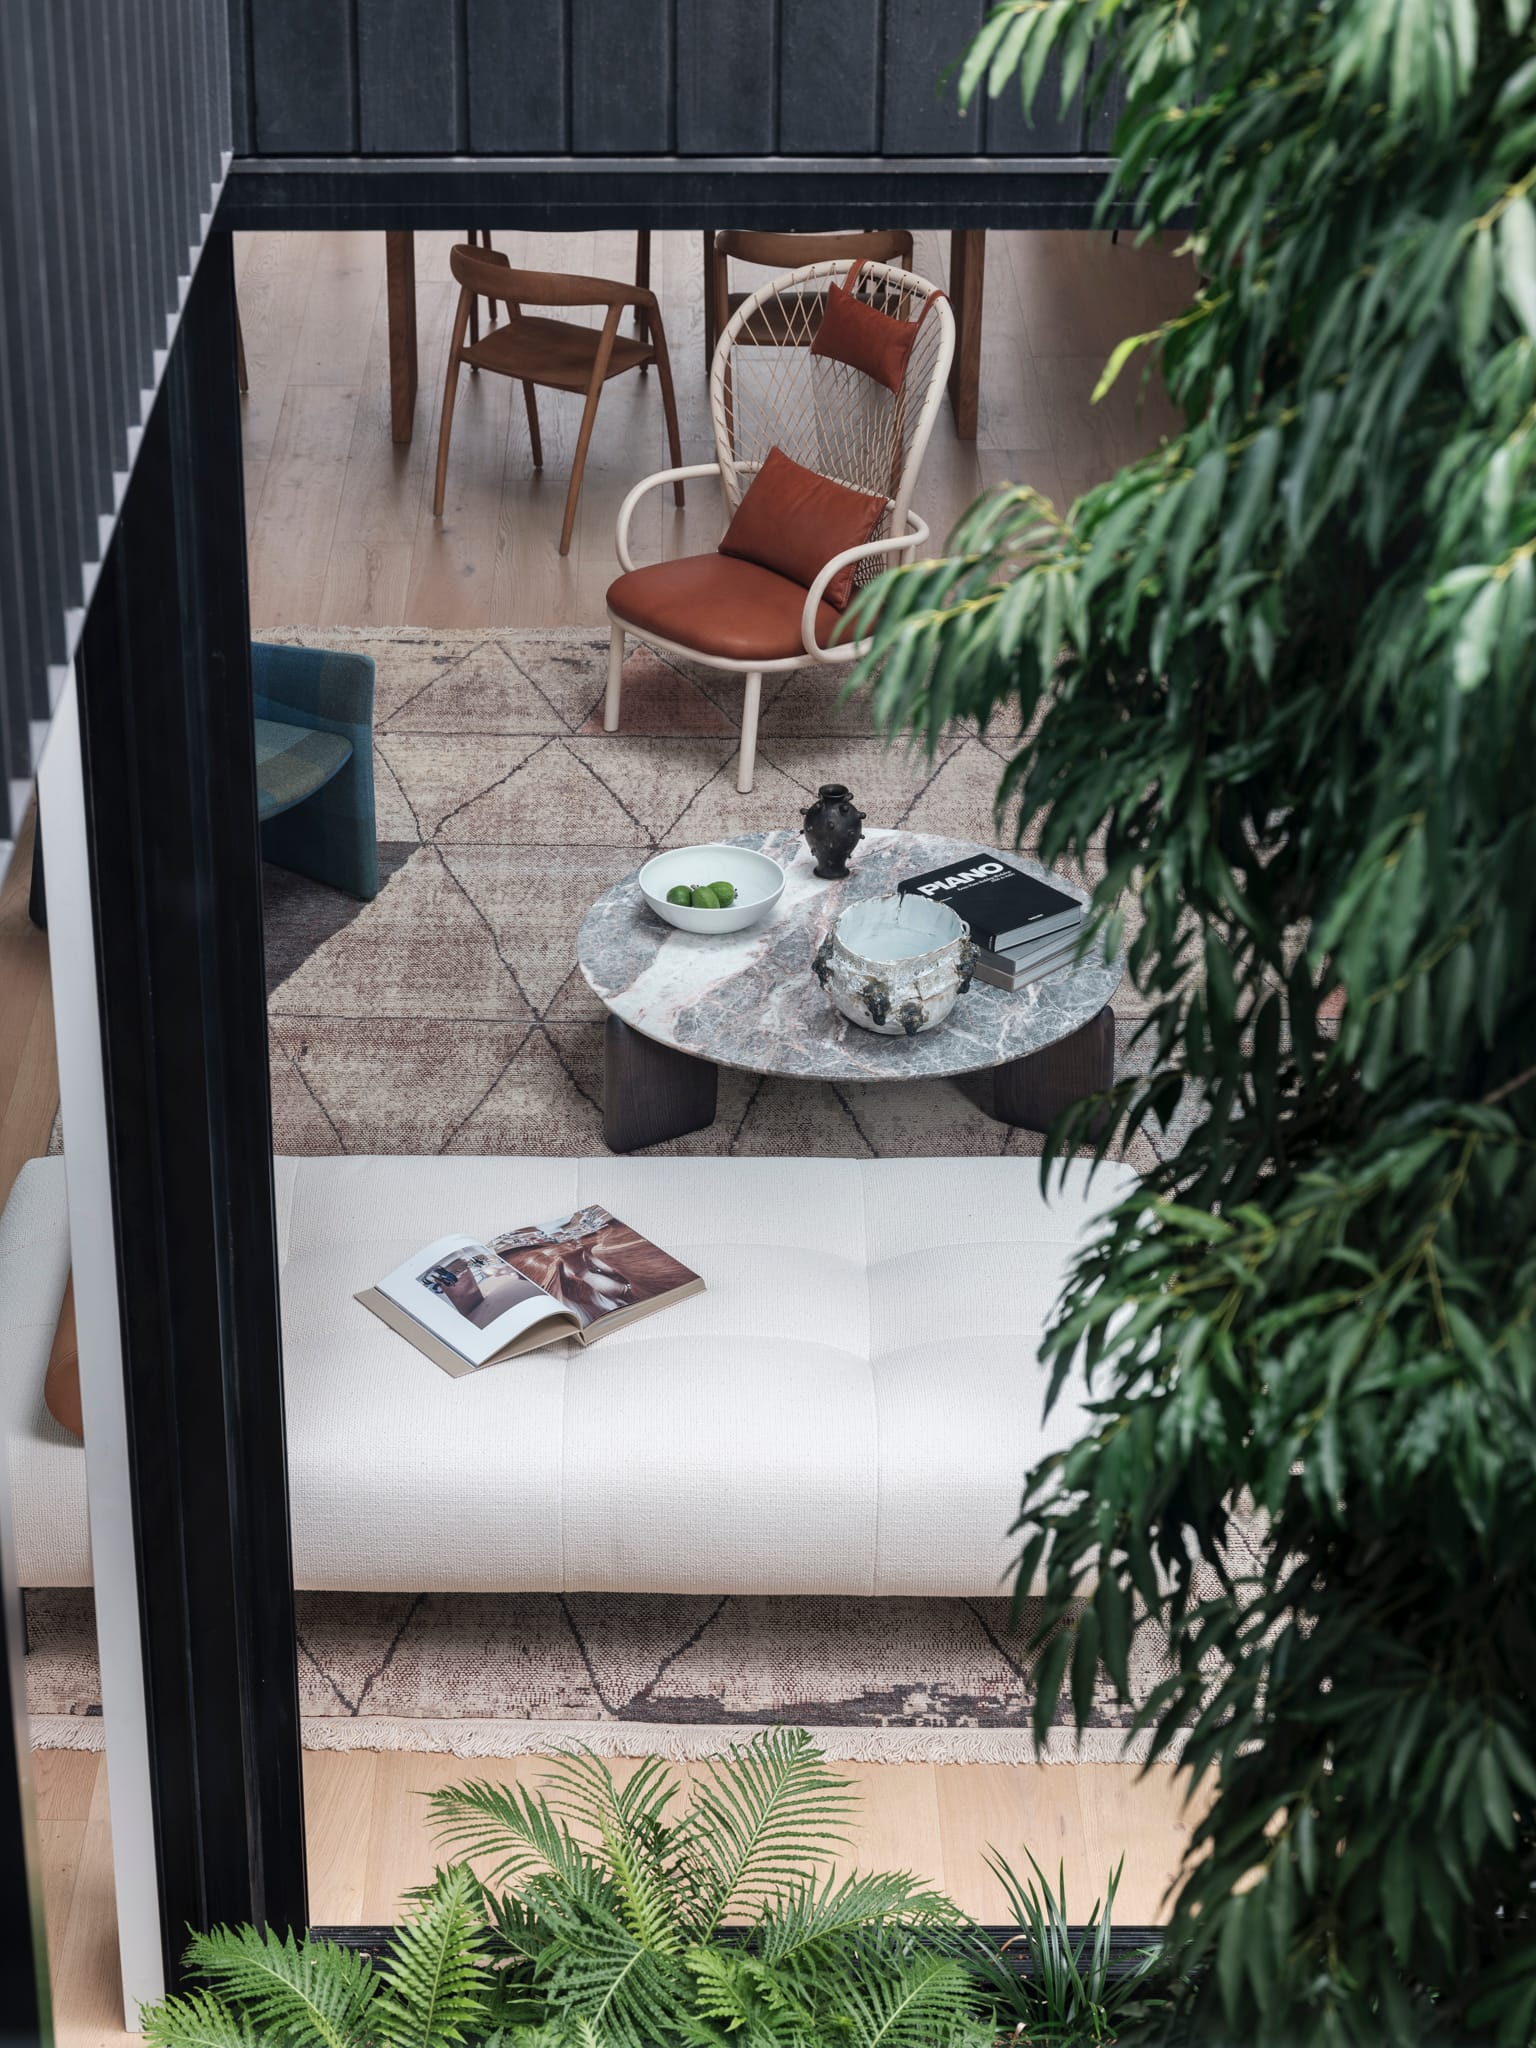 Bellevue House by Carla Middleton Architects. Photography by Tom Ferguson. Angled view from interior courtyard into interior living space. Foliage visible in foreground. Couch, coffee table and rug in background. 